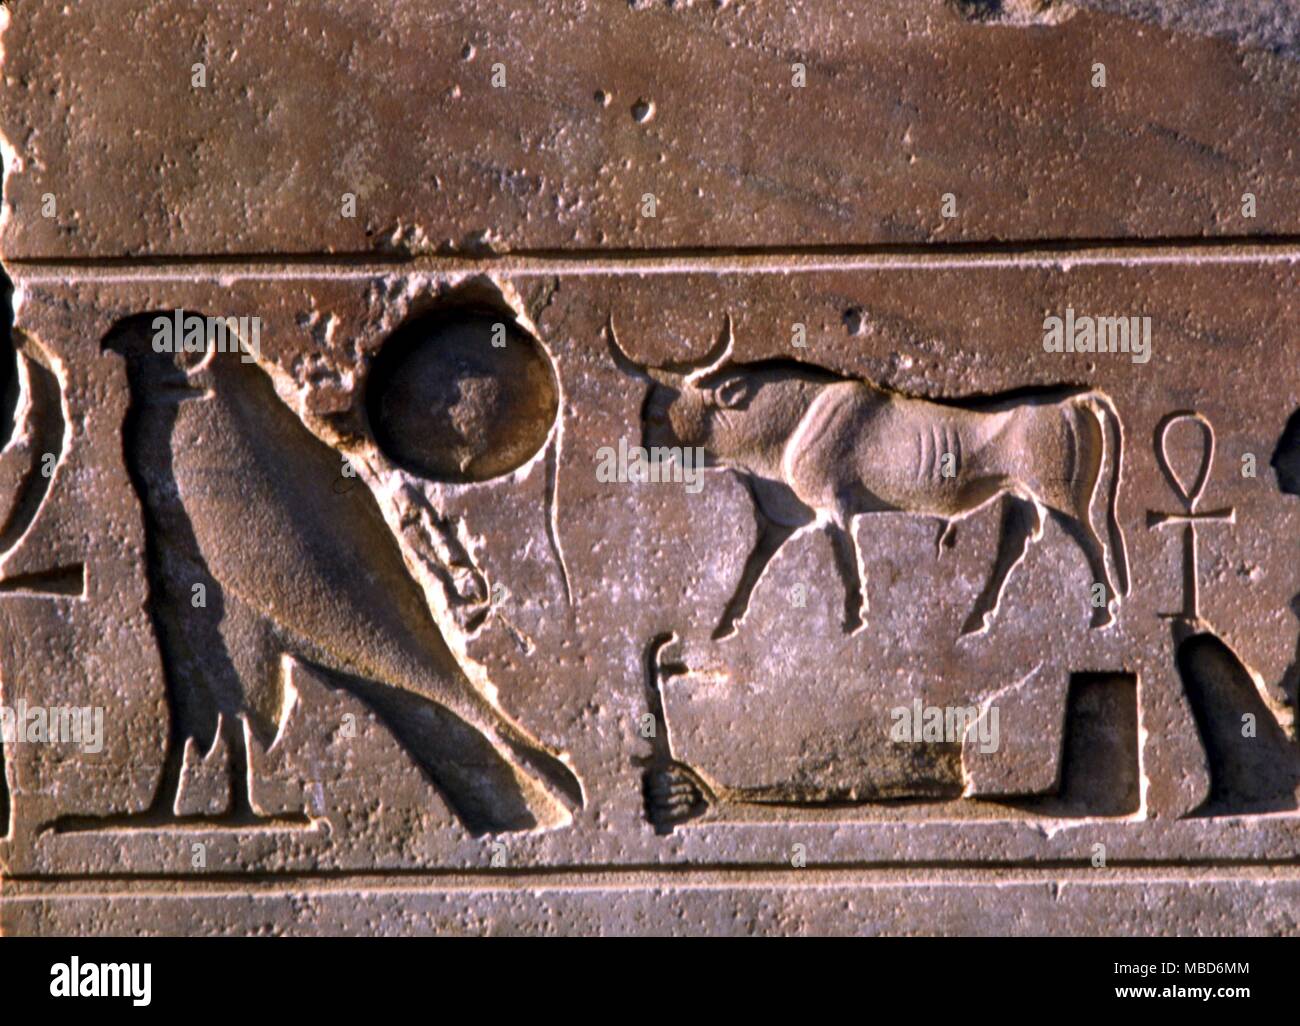 EGYPT - Hieroglyphics - alphabets - The forms of the falcon, bull, and ankh, on a statue socle in the temenos of the Temple of Luxor, Egypt Stock Photo